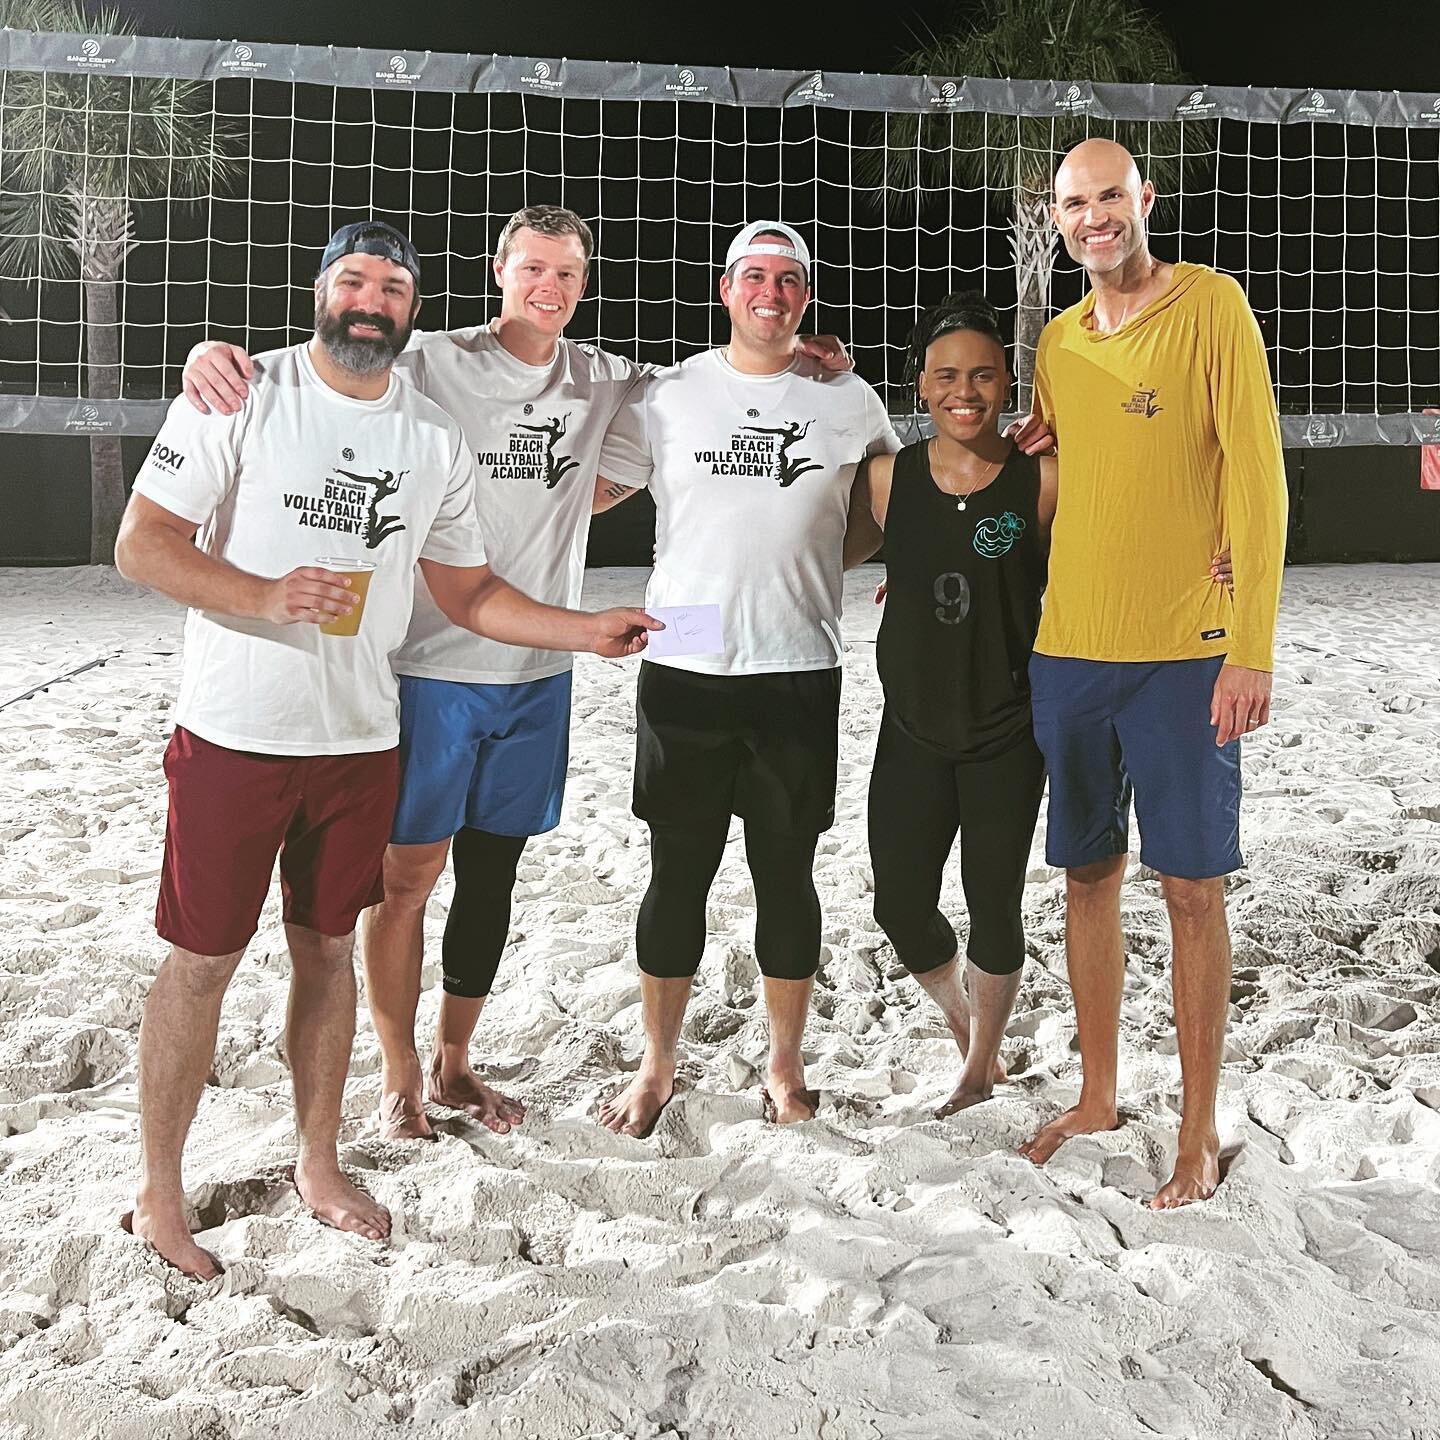 The Team to Beat with the big W last night over team IMUA, at our Thursday&rsquo;s Rec Adult League! 
Thanks @boxiparklakenona for creating such a fun atmosphere for us adults just trying to have some fun!👊🏼🍻